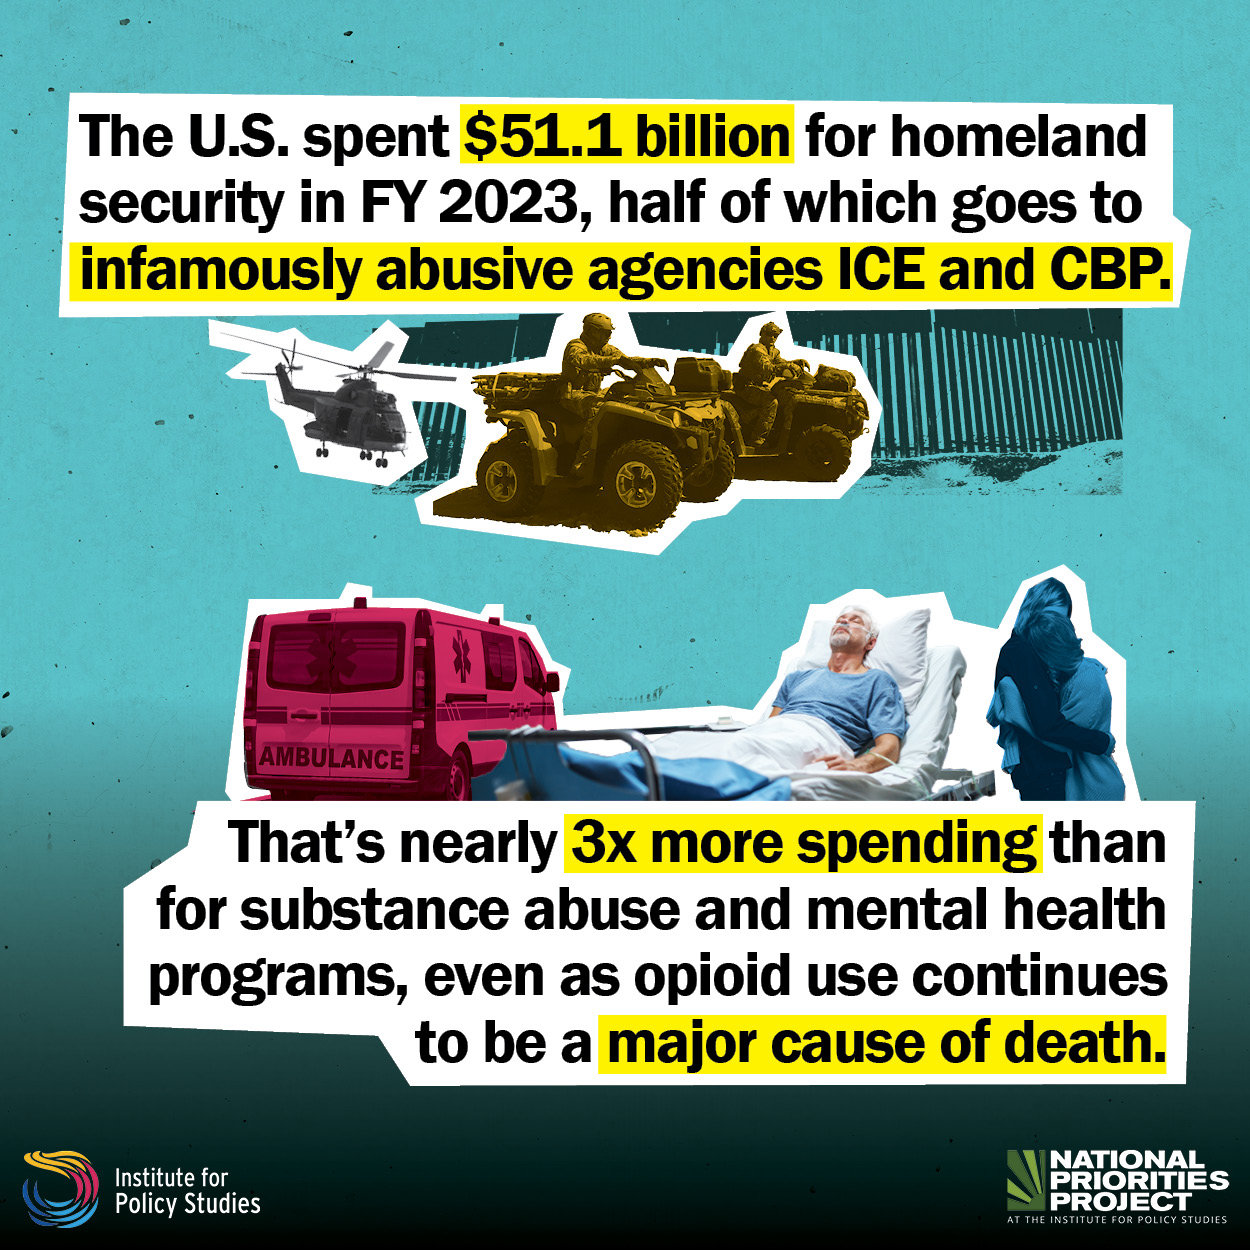 The U.S. spent $51.1 billion for homeland security in FY 2023, half of which goes to infamously abusive agencies ICE and CBP [images of CBP agents on four-wheelers and helicopters by the border wall]. That’s nearly 3x more spending than for substance abuse and mental health programs, even as opioid use continues to be a major cause of death. [Images of an ambulance, someone lying in a hospital bed, and people hugging and crying.]” Below are the logos for the Institute for Policy Studies and the National Priorities Project.